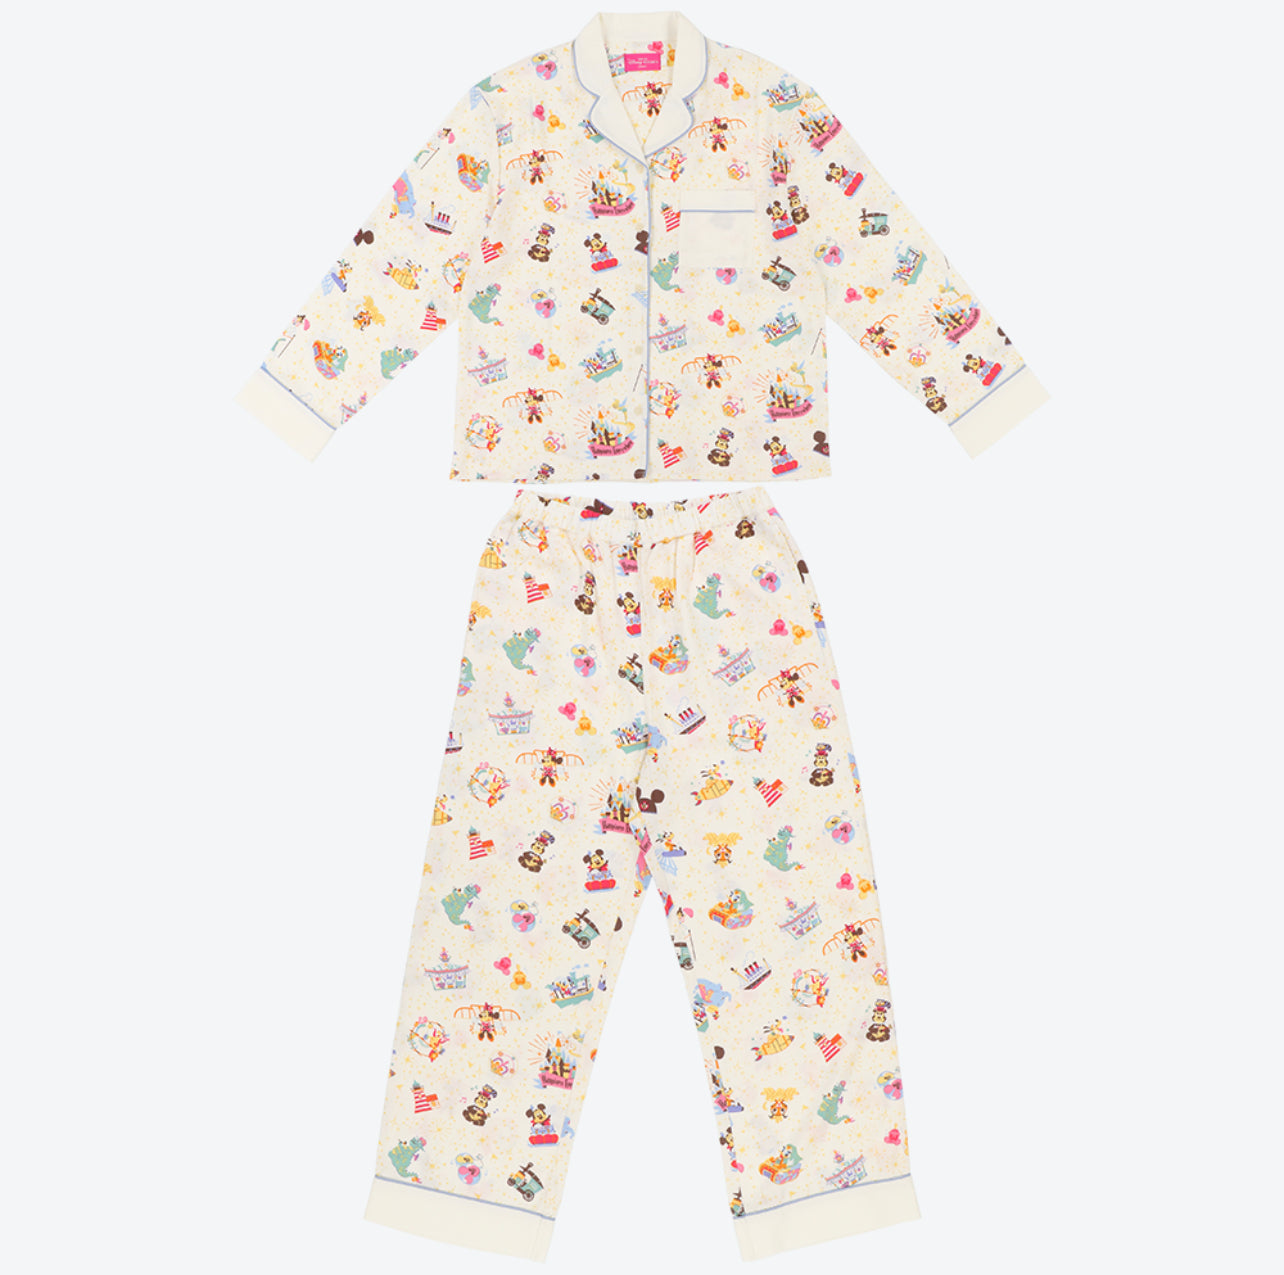 TDR - It's a Small World Collection x Pajama Set For Adults